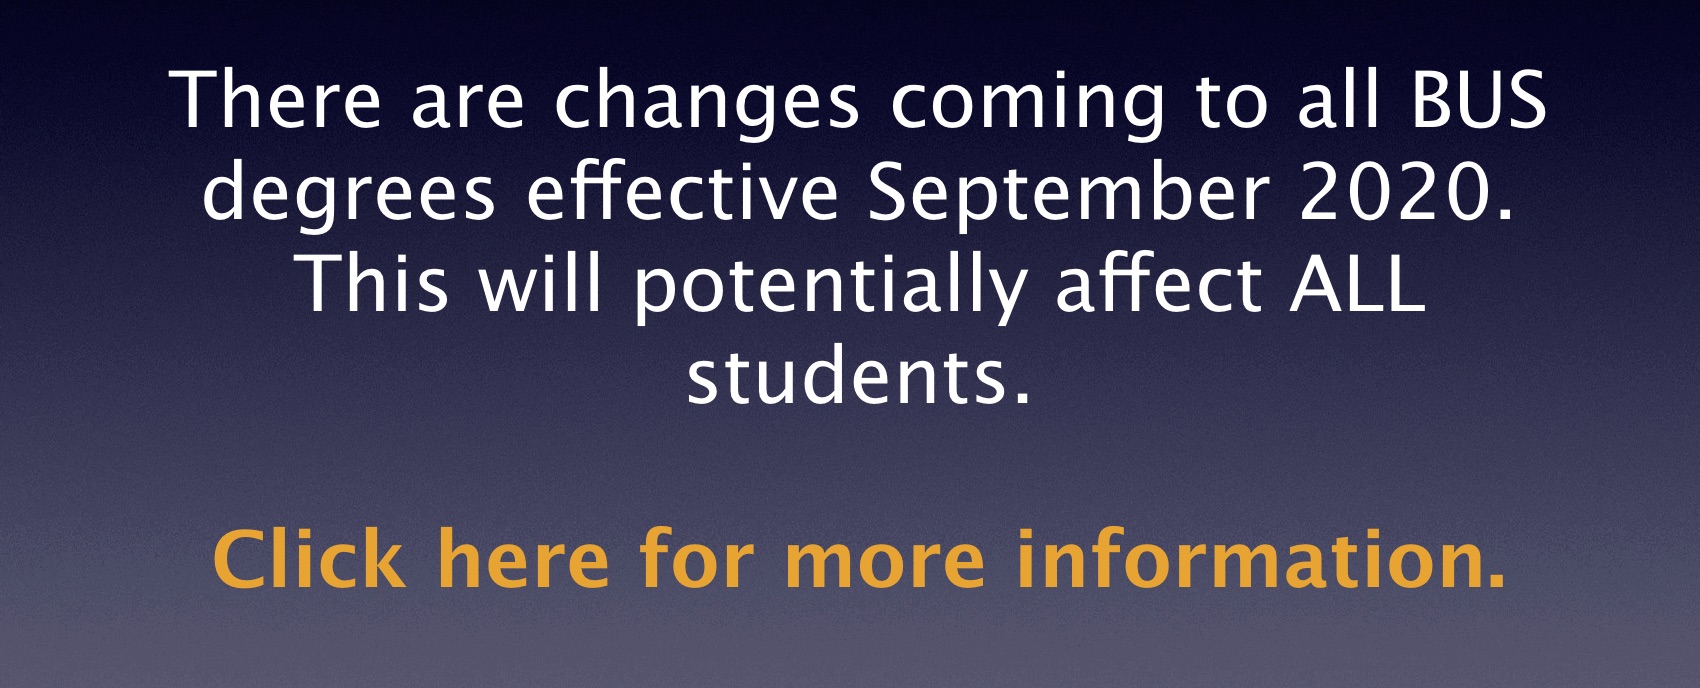 There are changes coming to all business degrees effect Sept 2020.